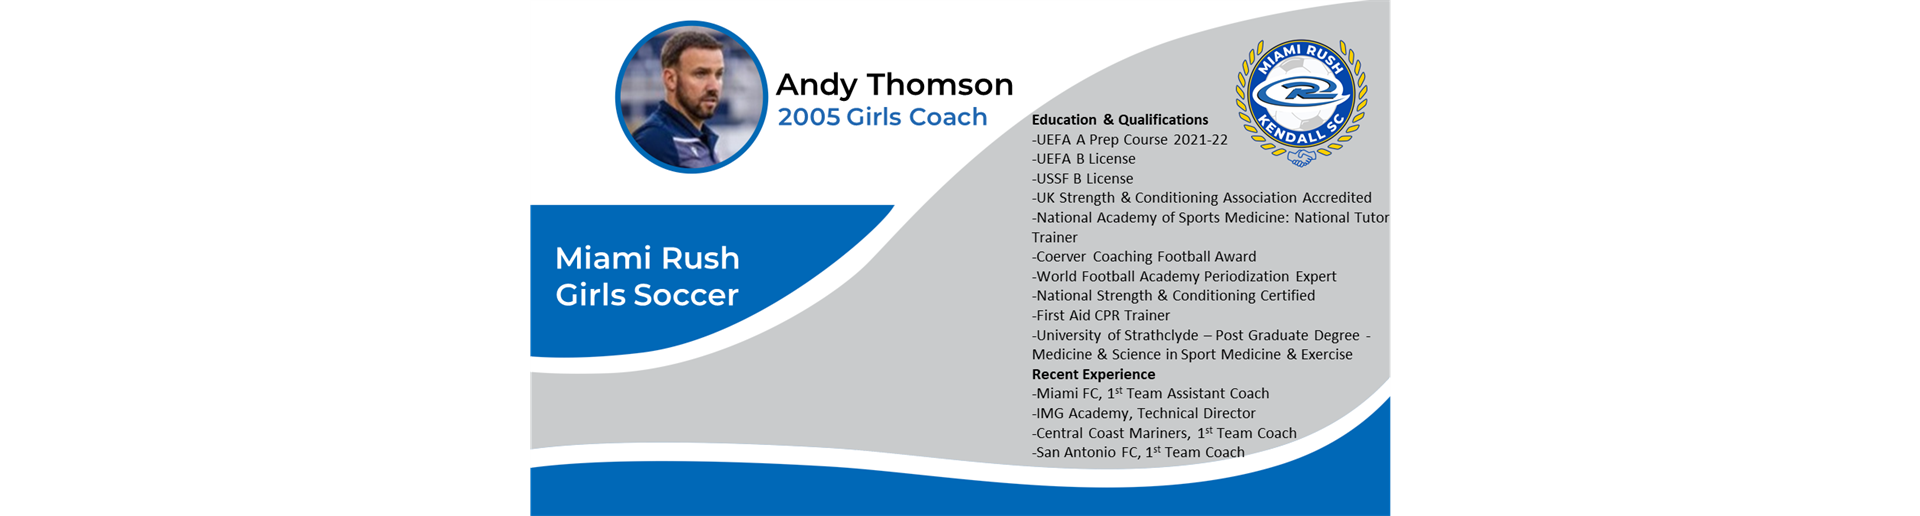 New 05 Girls Coach Andy Thomson